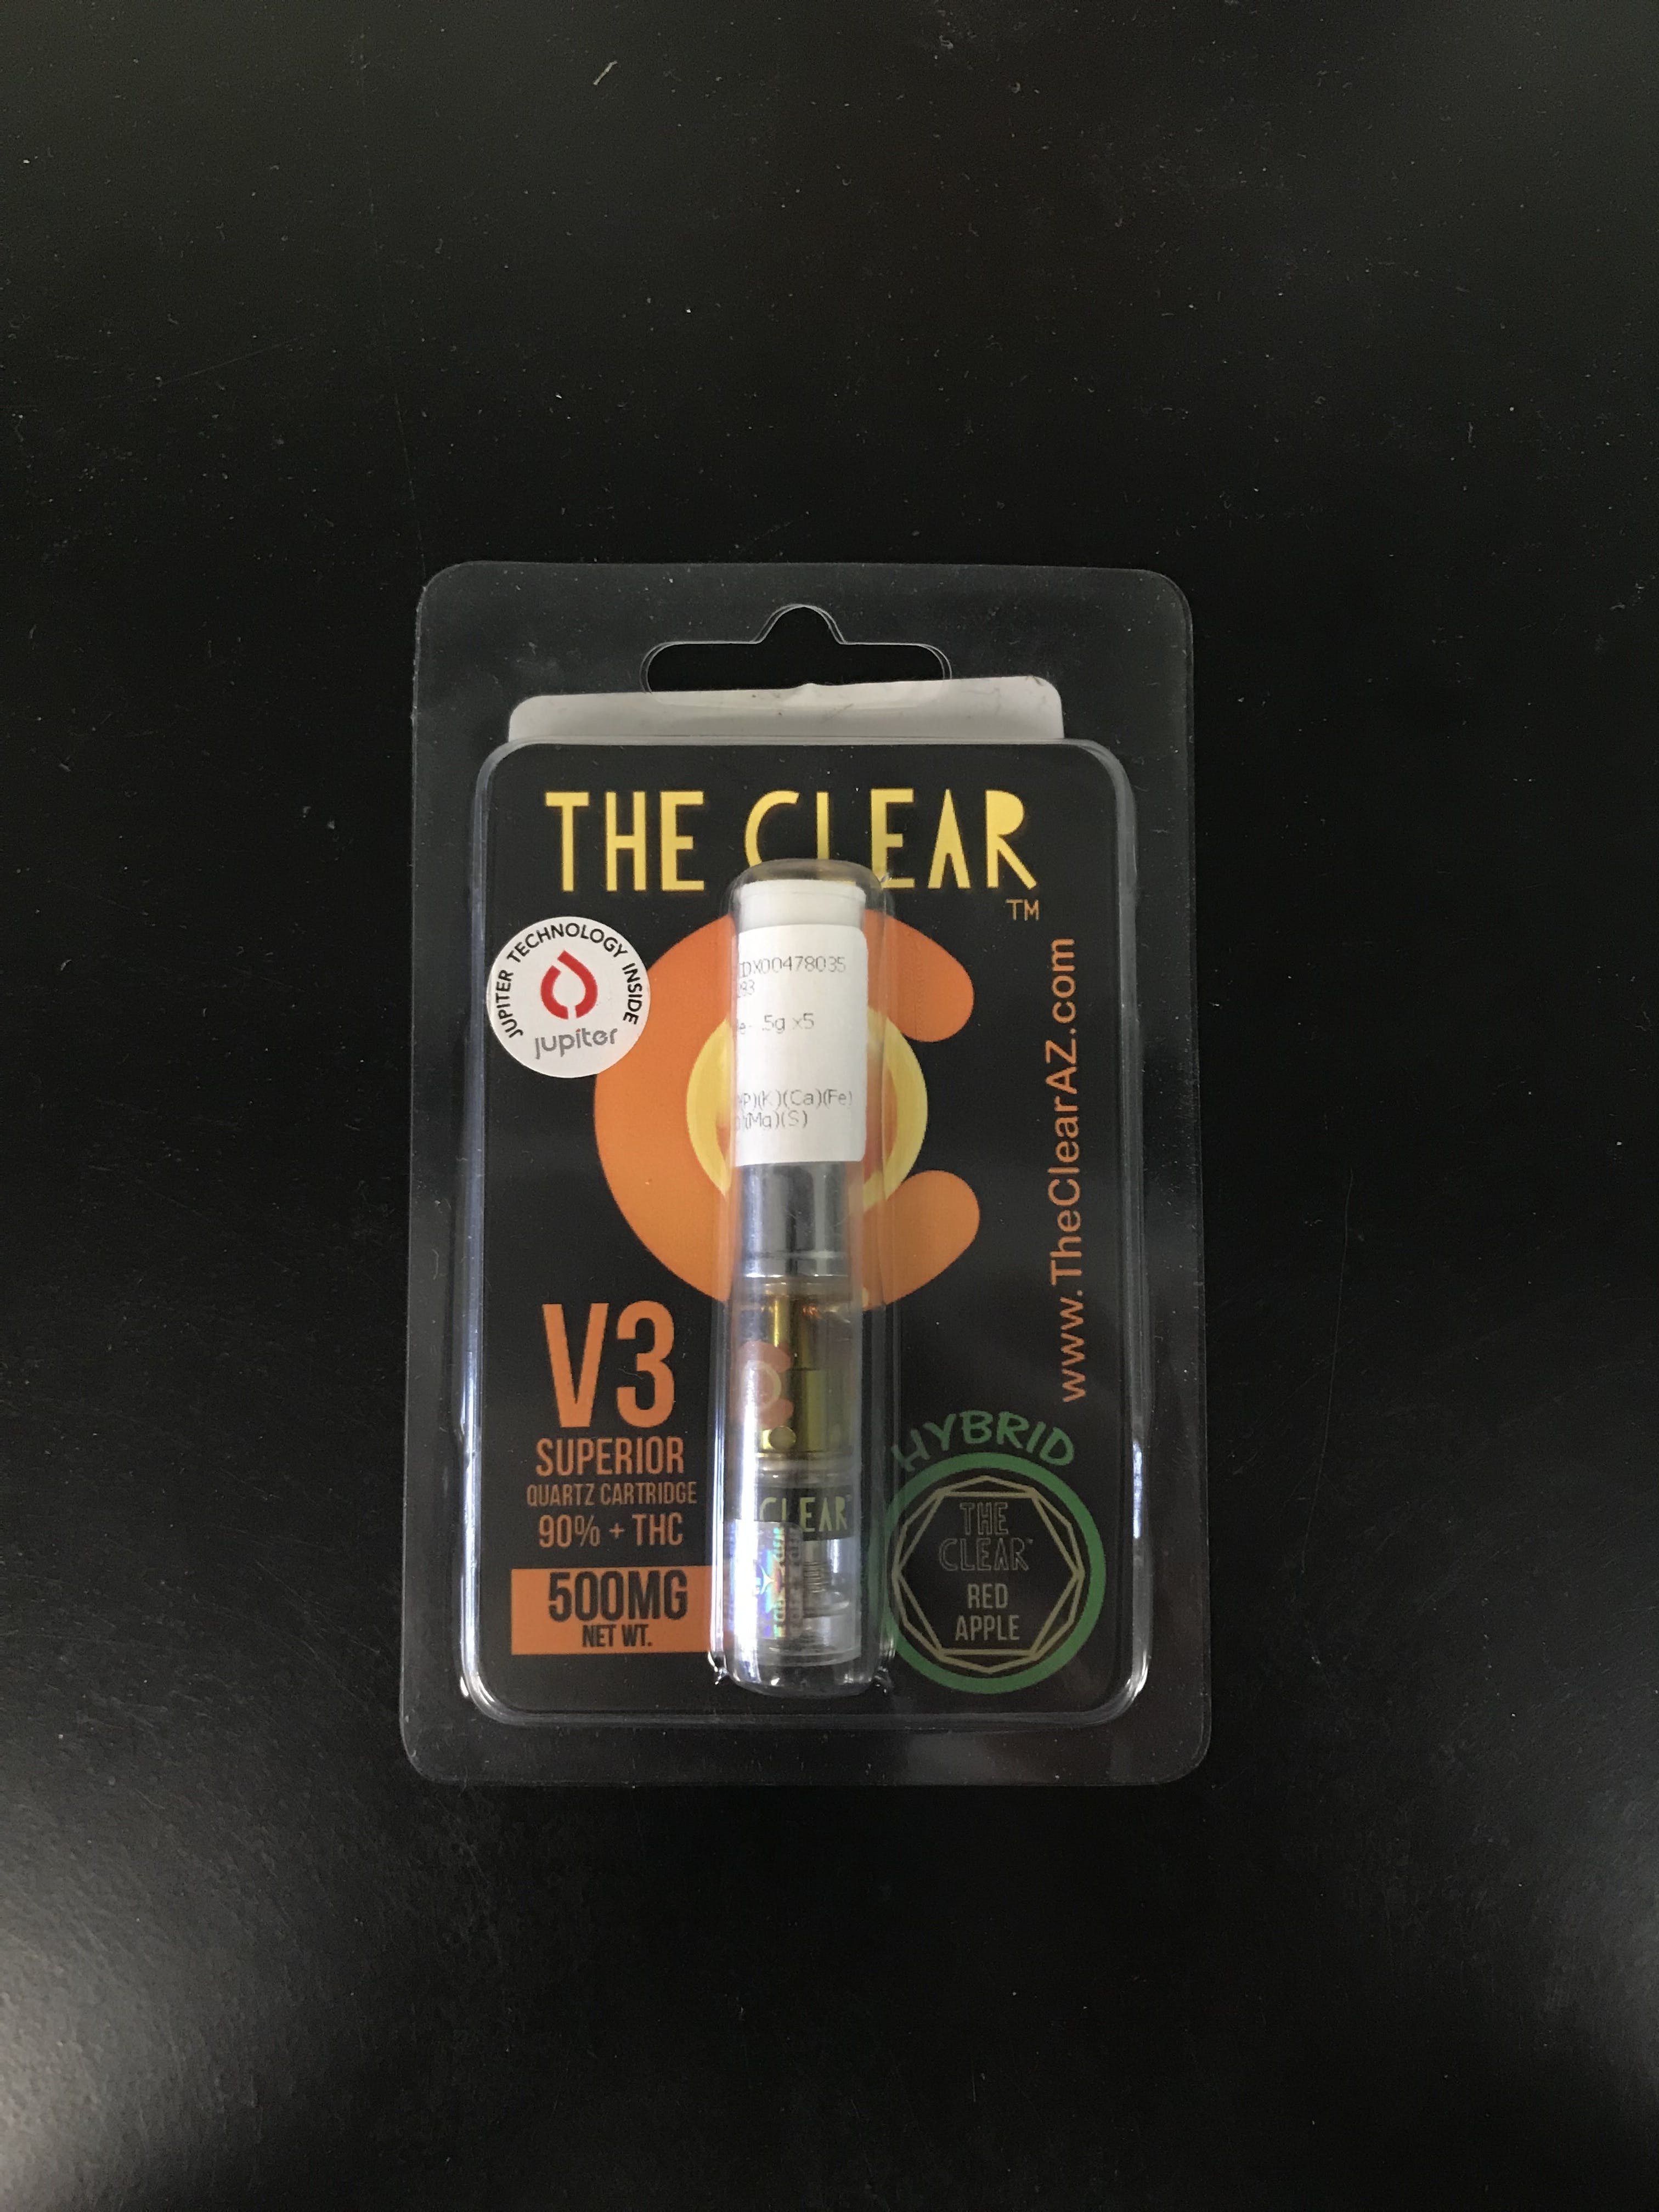 concentrate-the-clear-v3-red-apple-500mg-cartridge